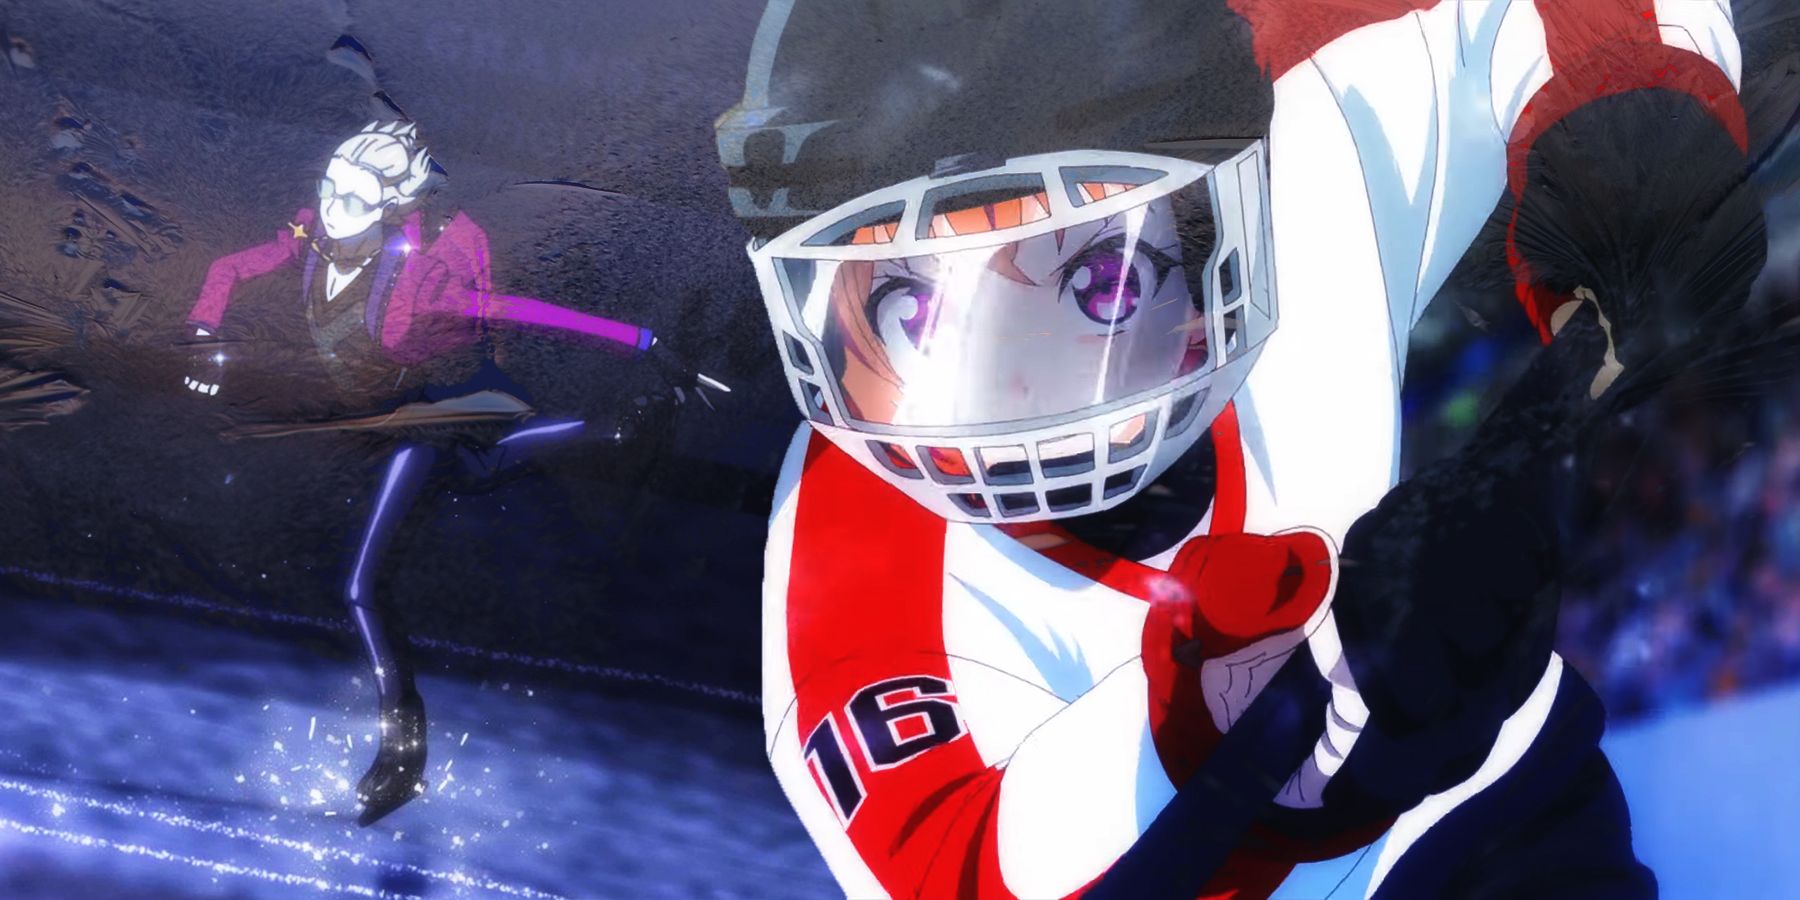 Lexica - Cute anime girl ice hockey player, habs jersey, blue white and red  color blocking, character concept exploration, ghost in the shell, outfit...